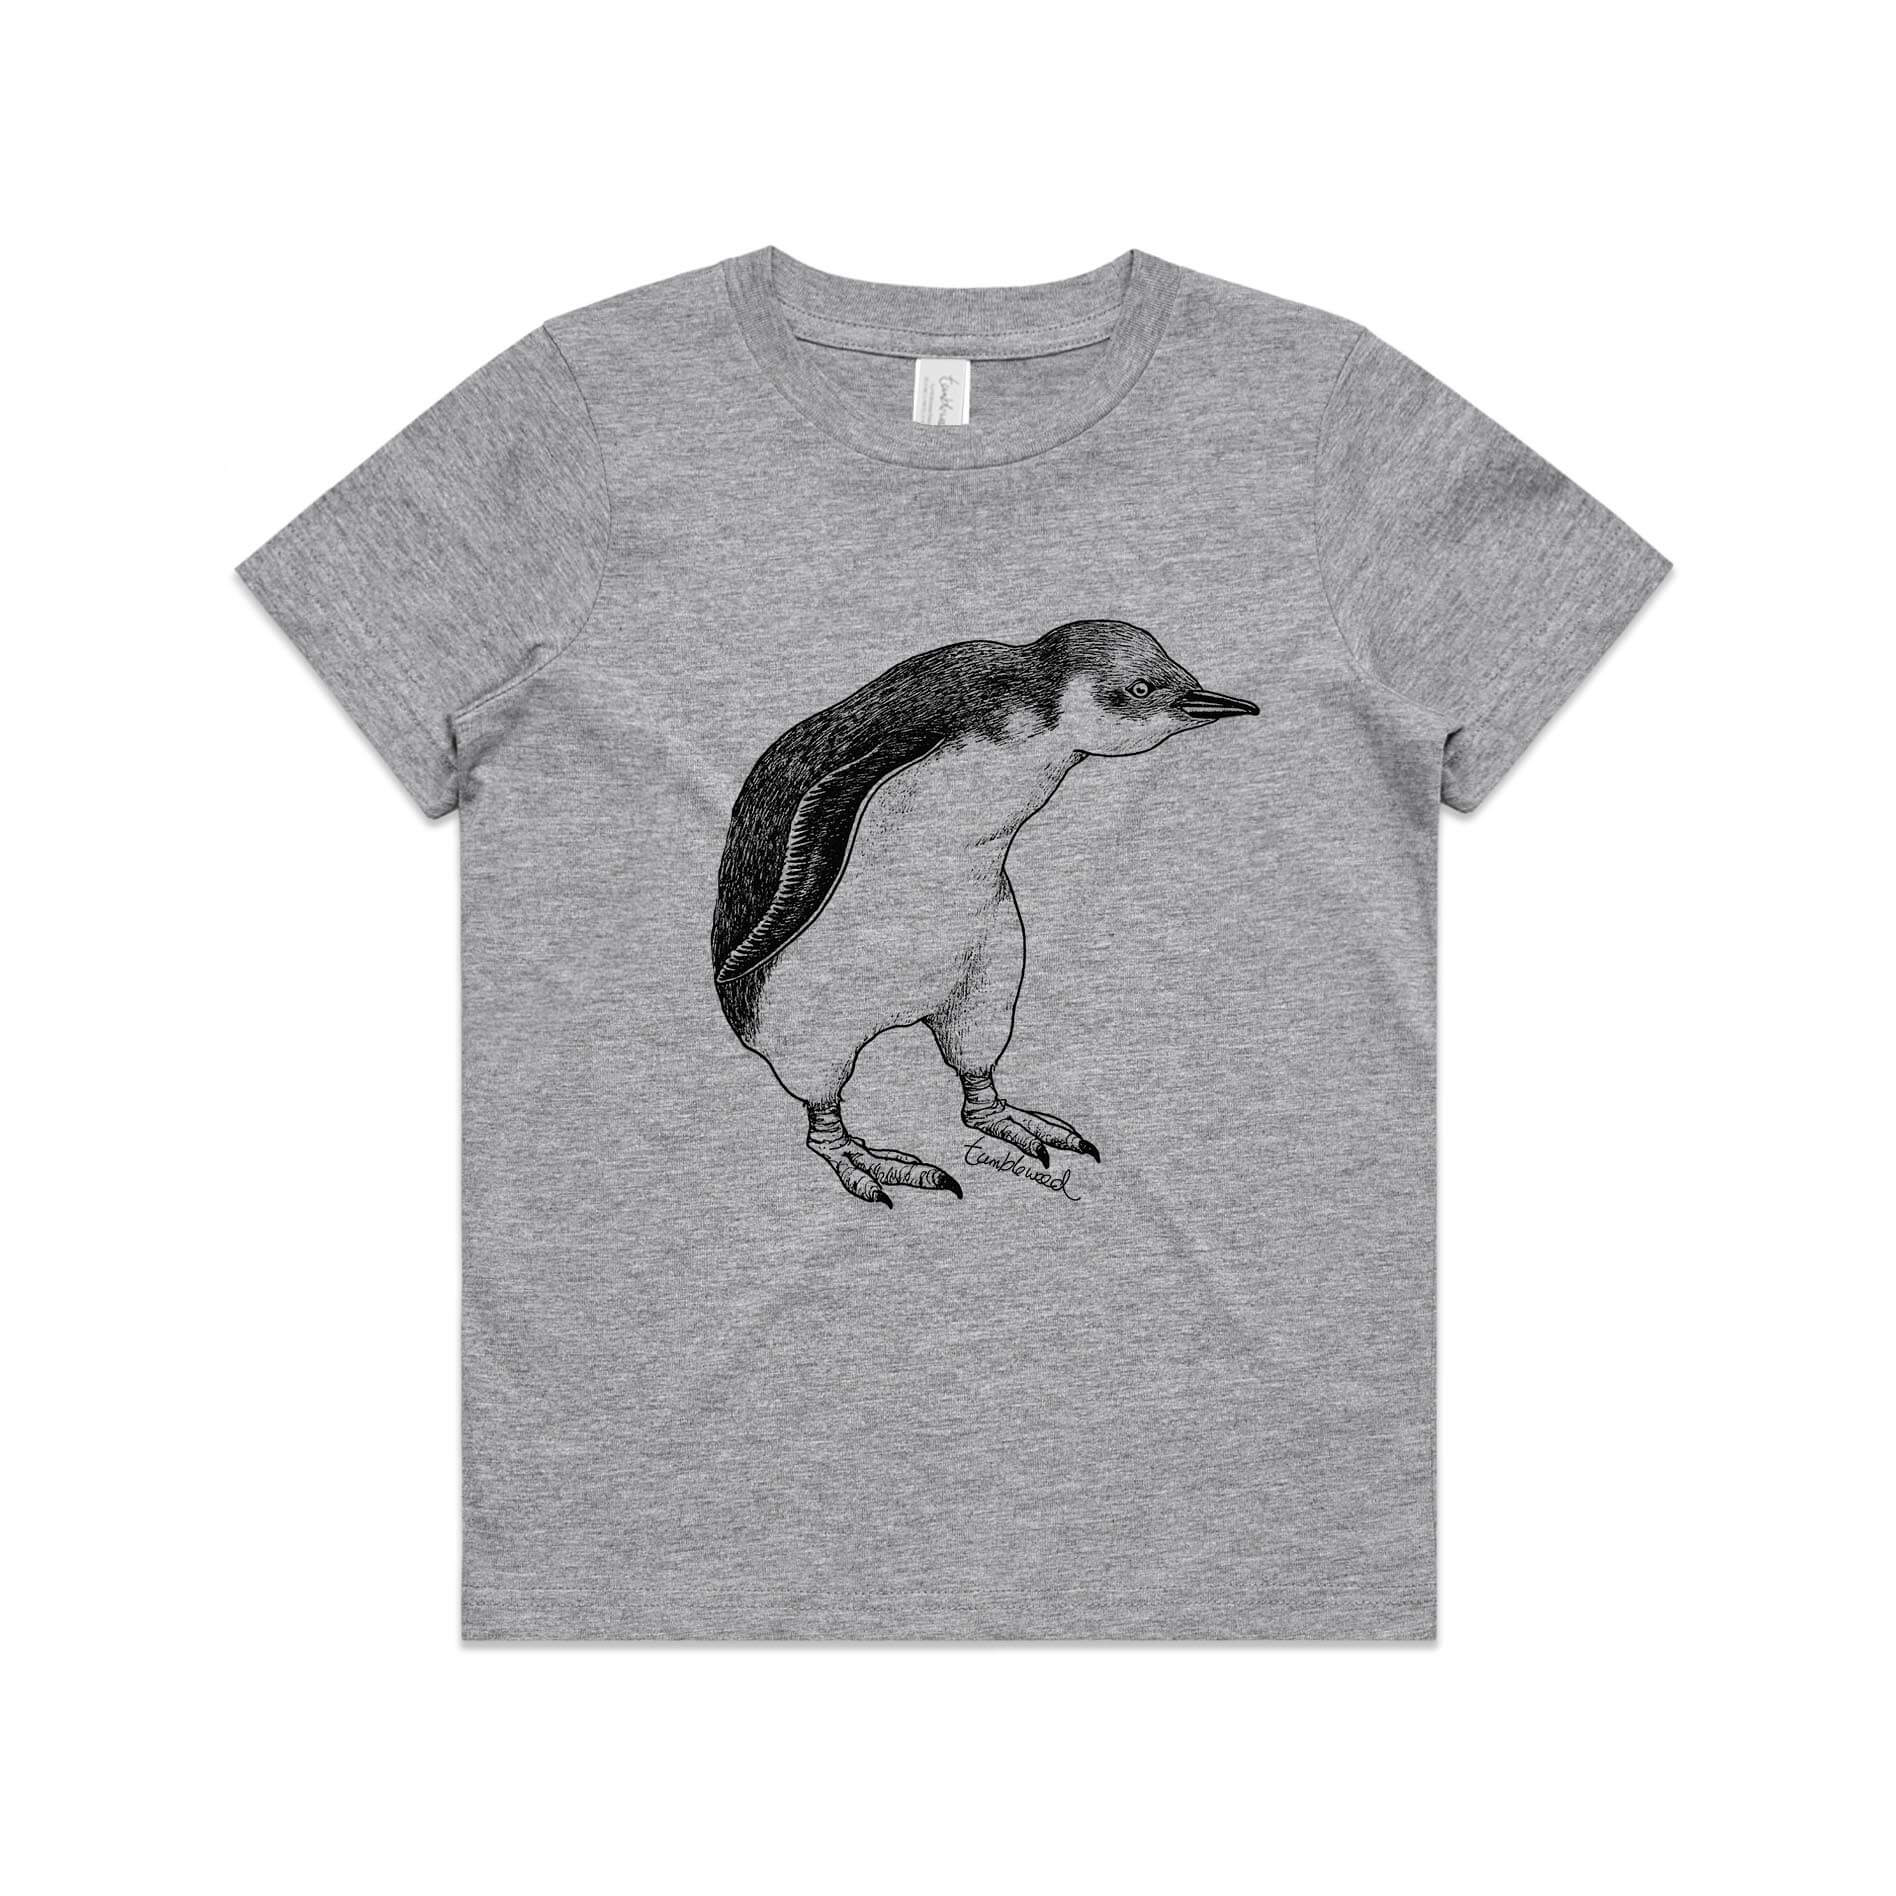 Grey marle, cotton kids' t-shirt with screen printed Kids little penguin design.